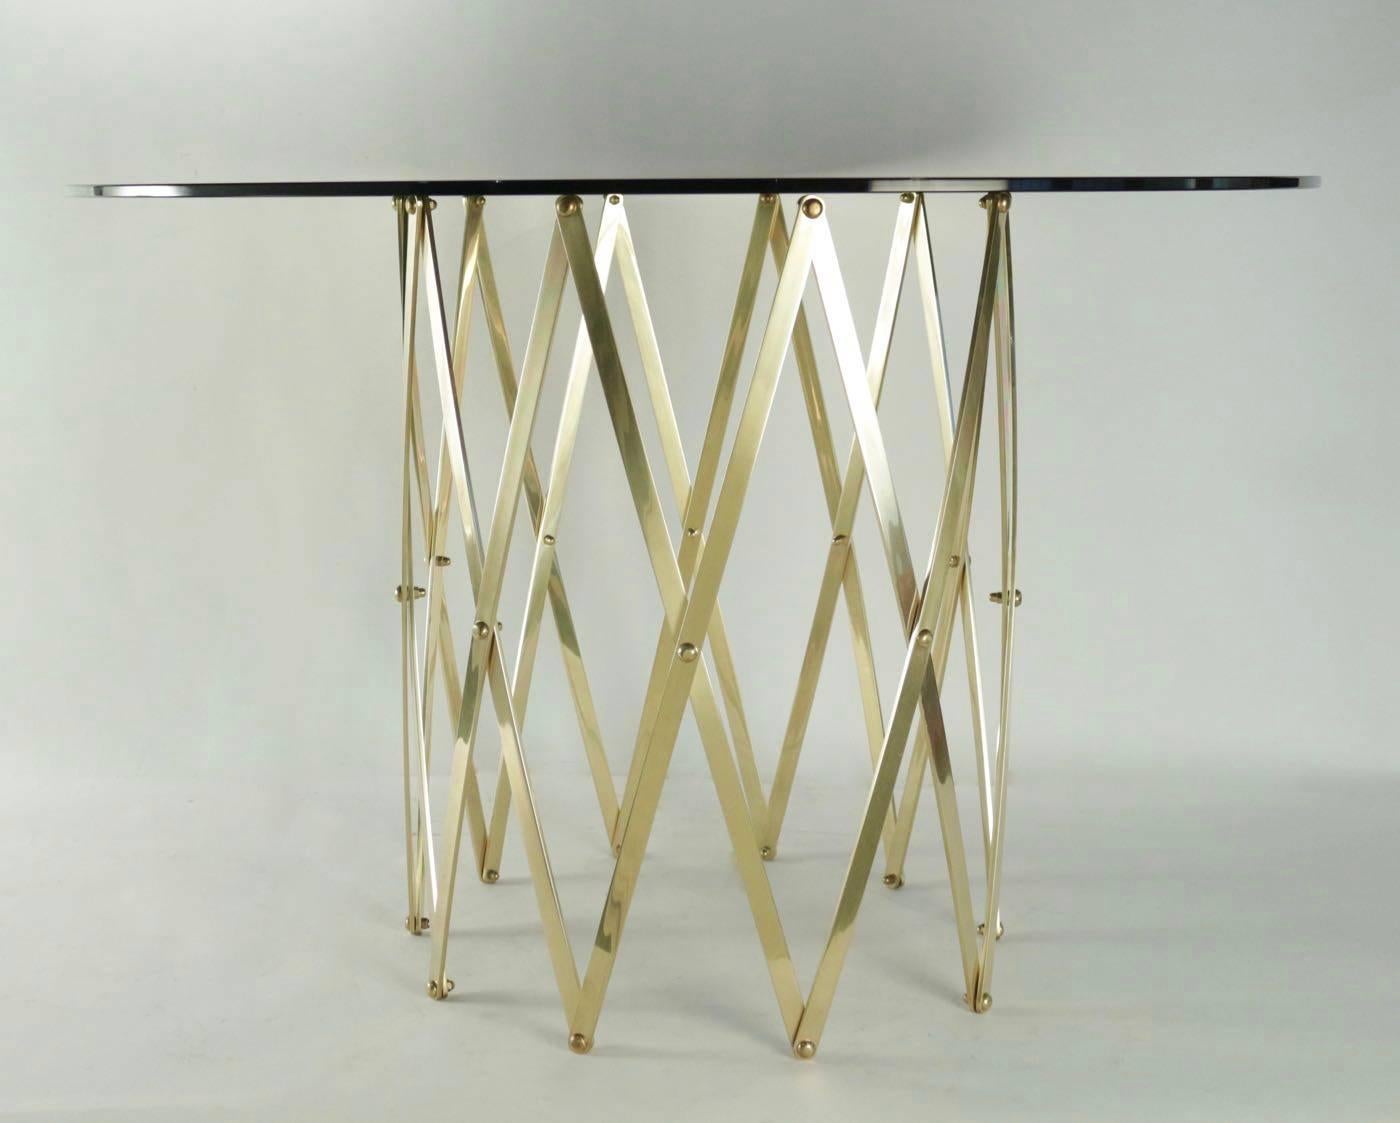 1960s Maison Honoré Extensible Brass Cross Brace Table.

The table base is composed by twenty brass stems which form cross brace motif.
The diameter and the height of the table base is adjustable, nice and clever system.
Round table plate of black